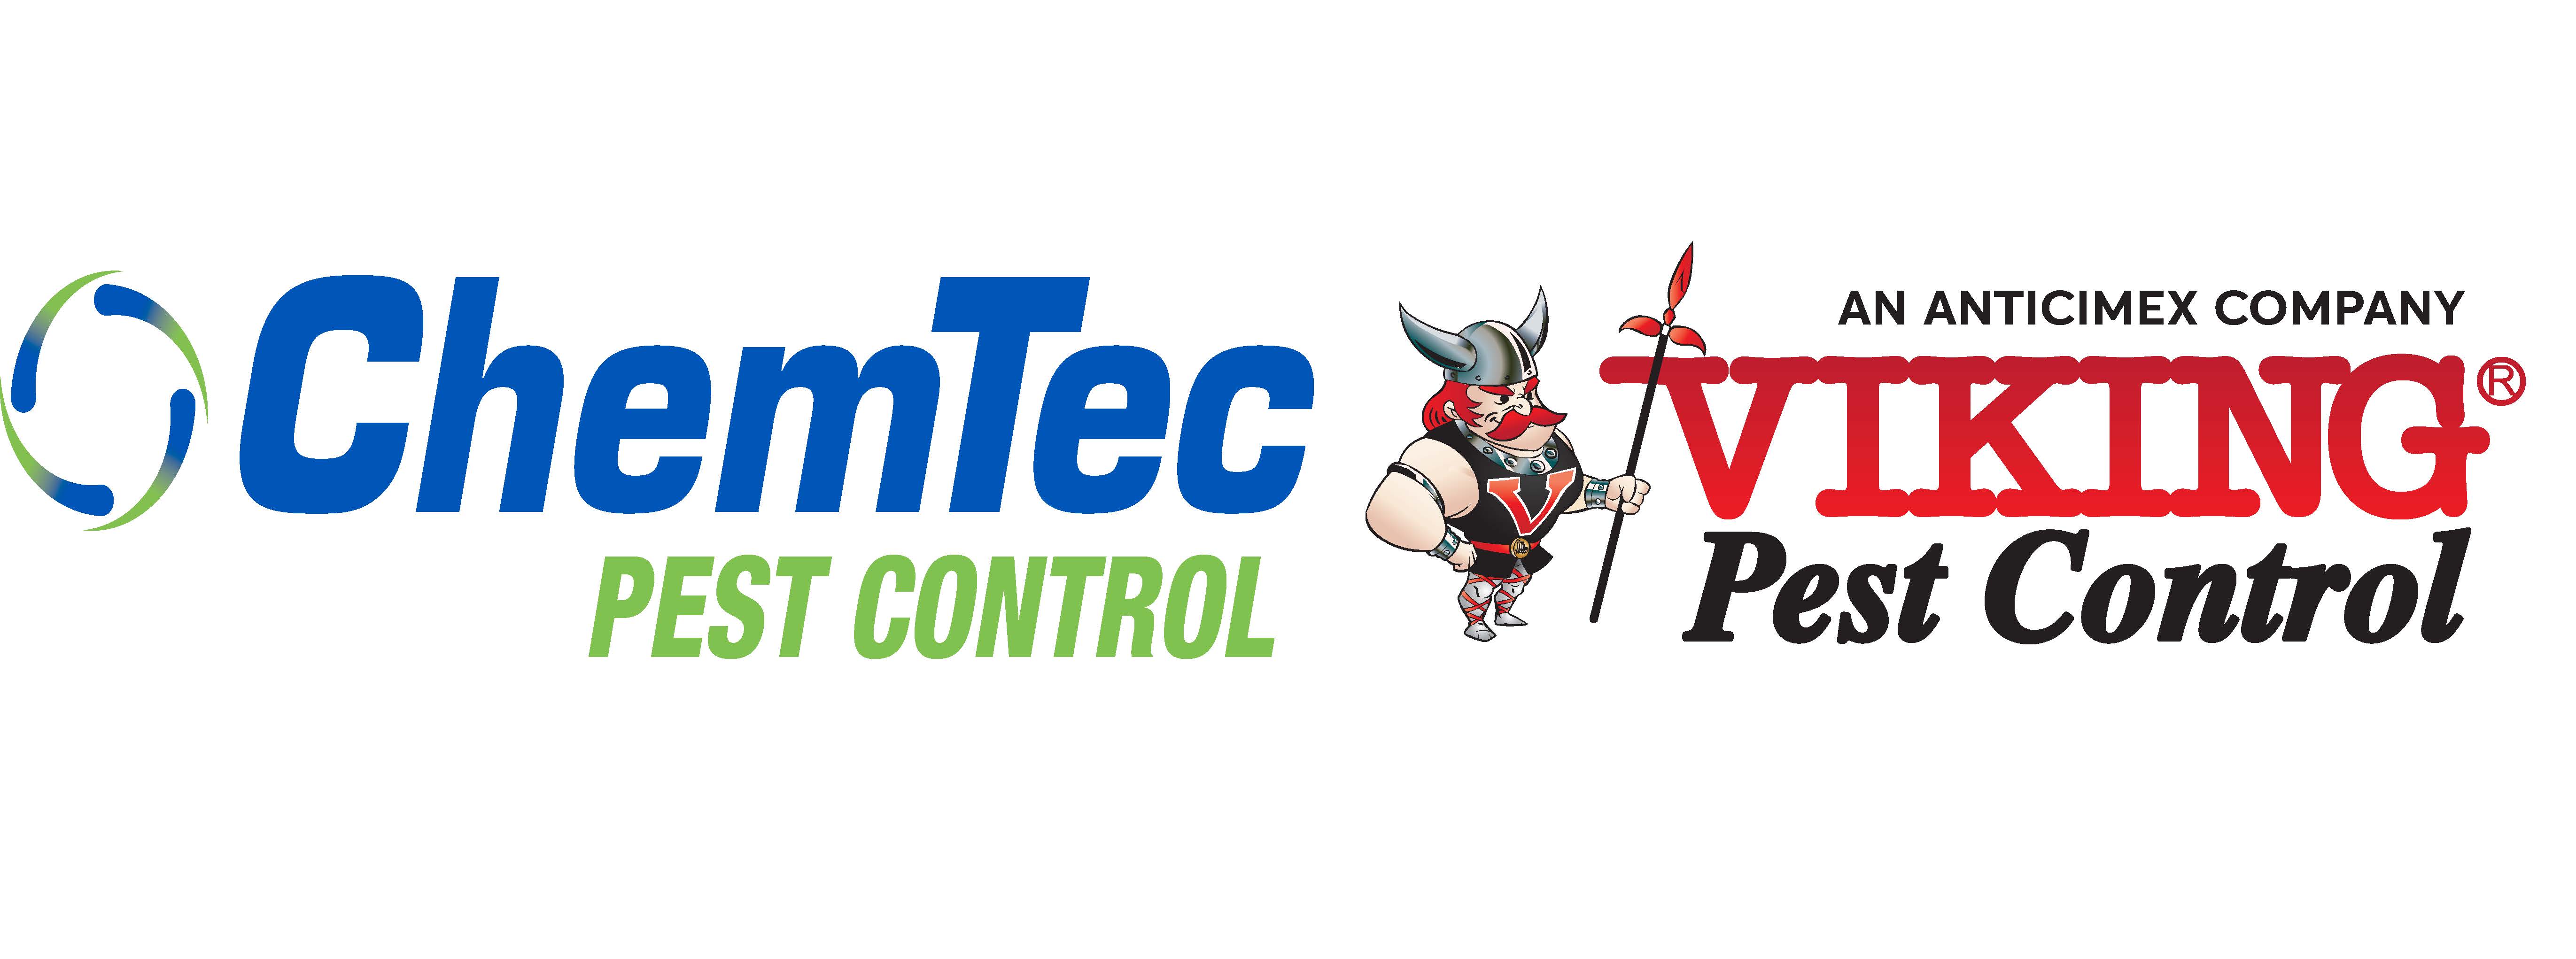 Acquisition in New Jersey Further Strengthens Viking Pest Control